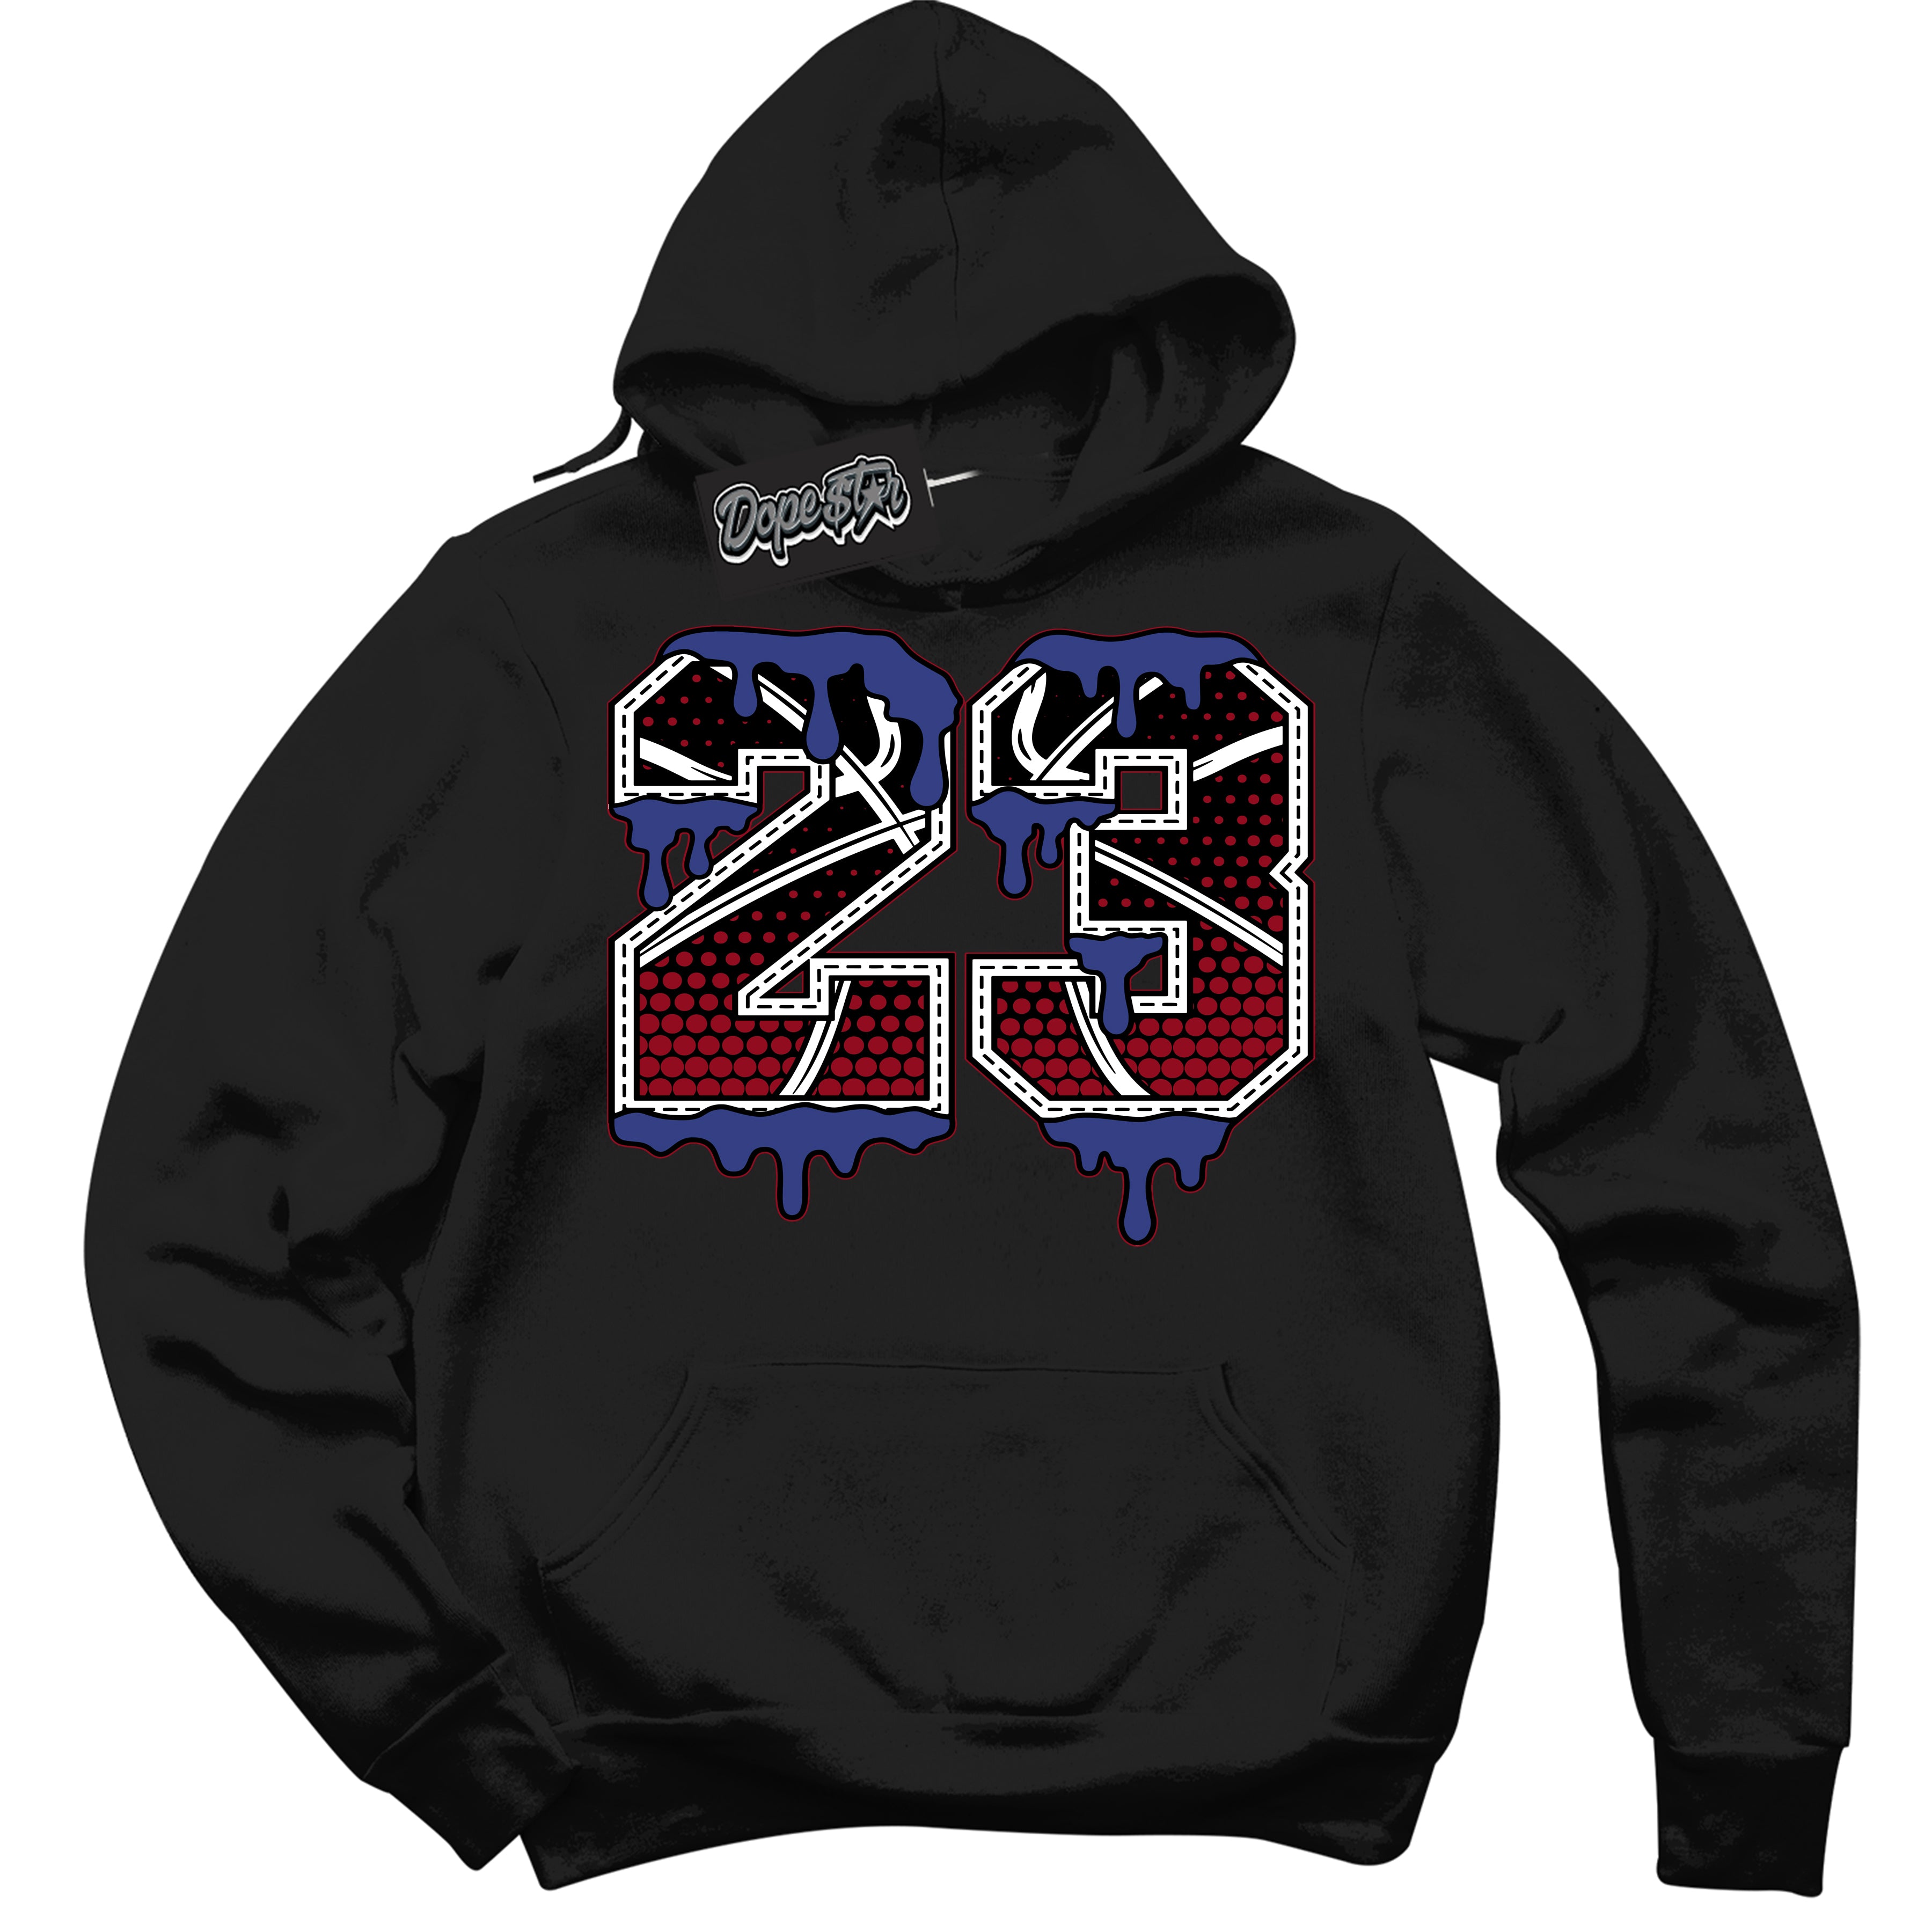 Cool Black Hoodie with “ 23 Ball ”  design that Perfectly Matches Playoffs 8s Sneakers.